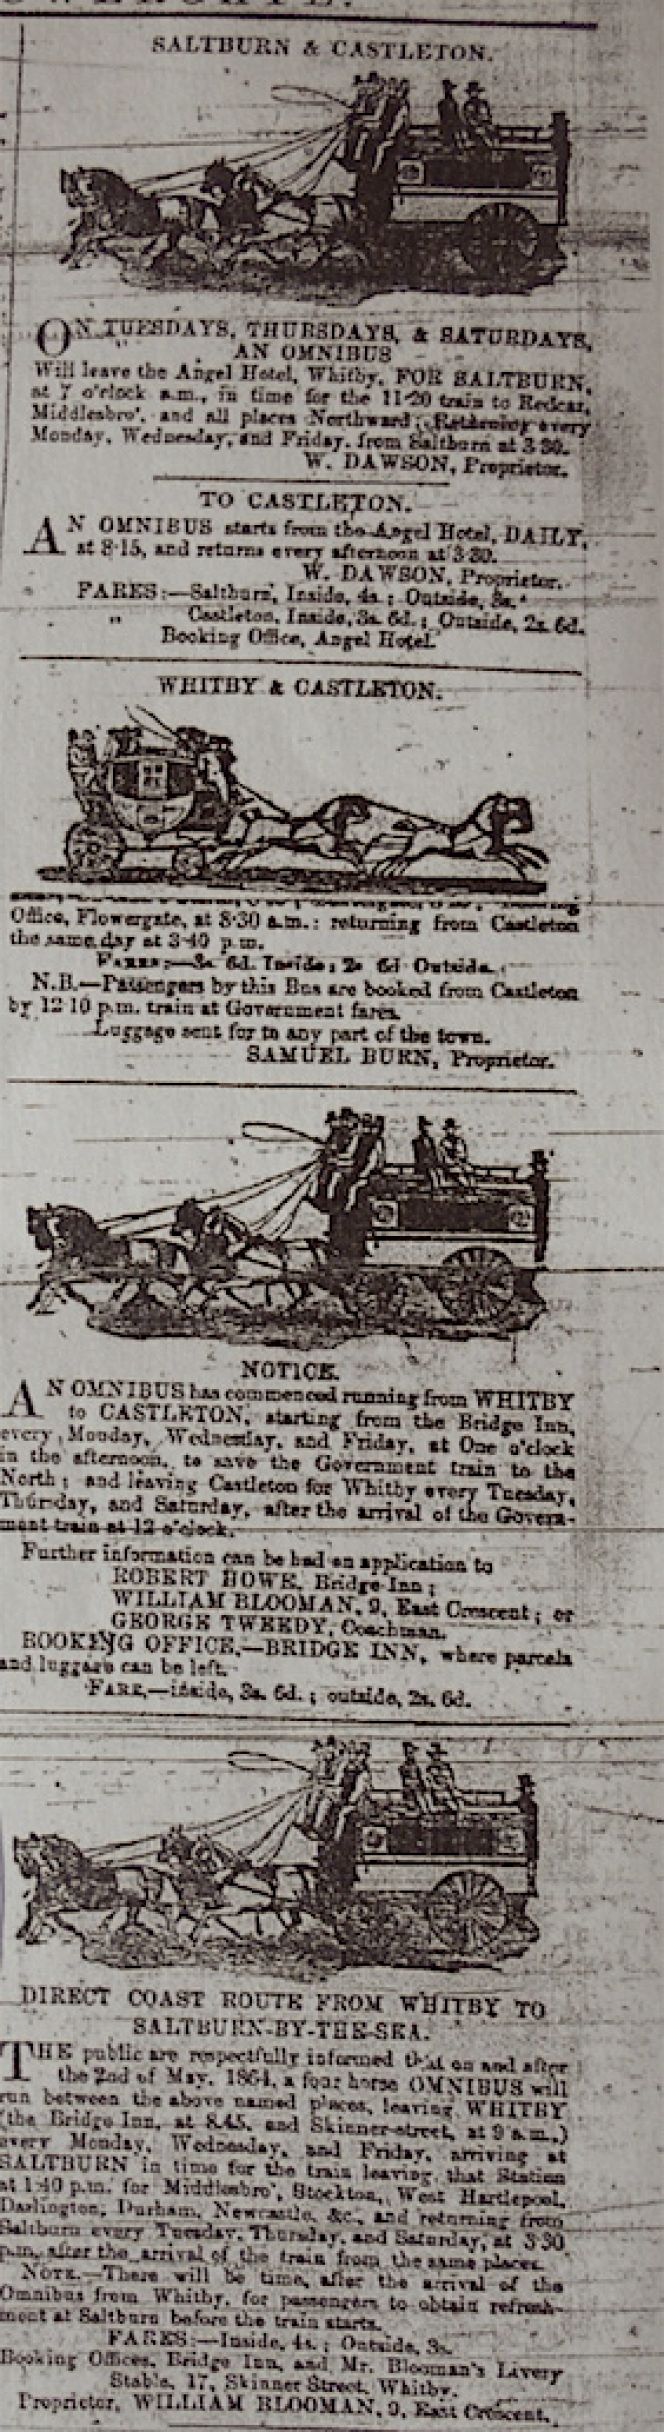 Informative advert of available coaches – in Whitby Gazette, 21st May in 1864. It may be noted that more than one coach firm operated to the same destinations; price, speed, comfort, refreshments, handling of luggage and direct routes were important qualities to pinpoint in this evidently competitive market. Unsurprisingly, the fare was cheaper for outside travel and also notice that timetables were coordinated with trains for ‘Middlesbrough, Stockton, West Hartlepool, Darlington, Durham, Newcastle. &c’. (Whitby Museum, Library & Archive). Photo: Viveka Hansen.